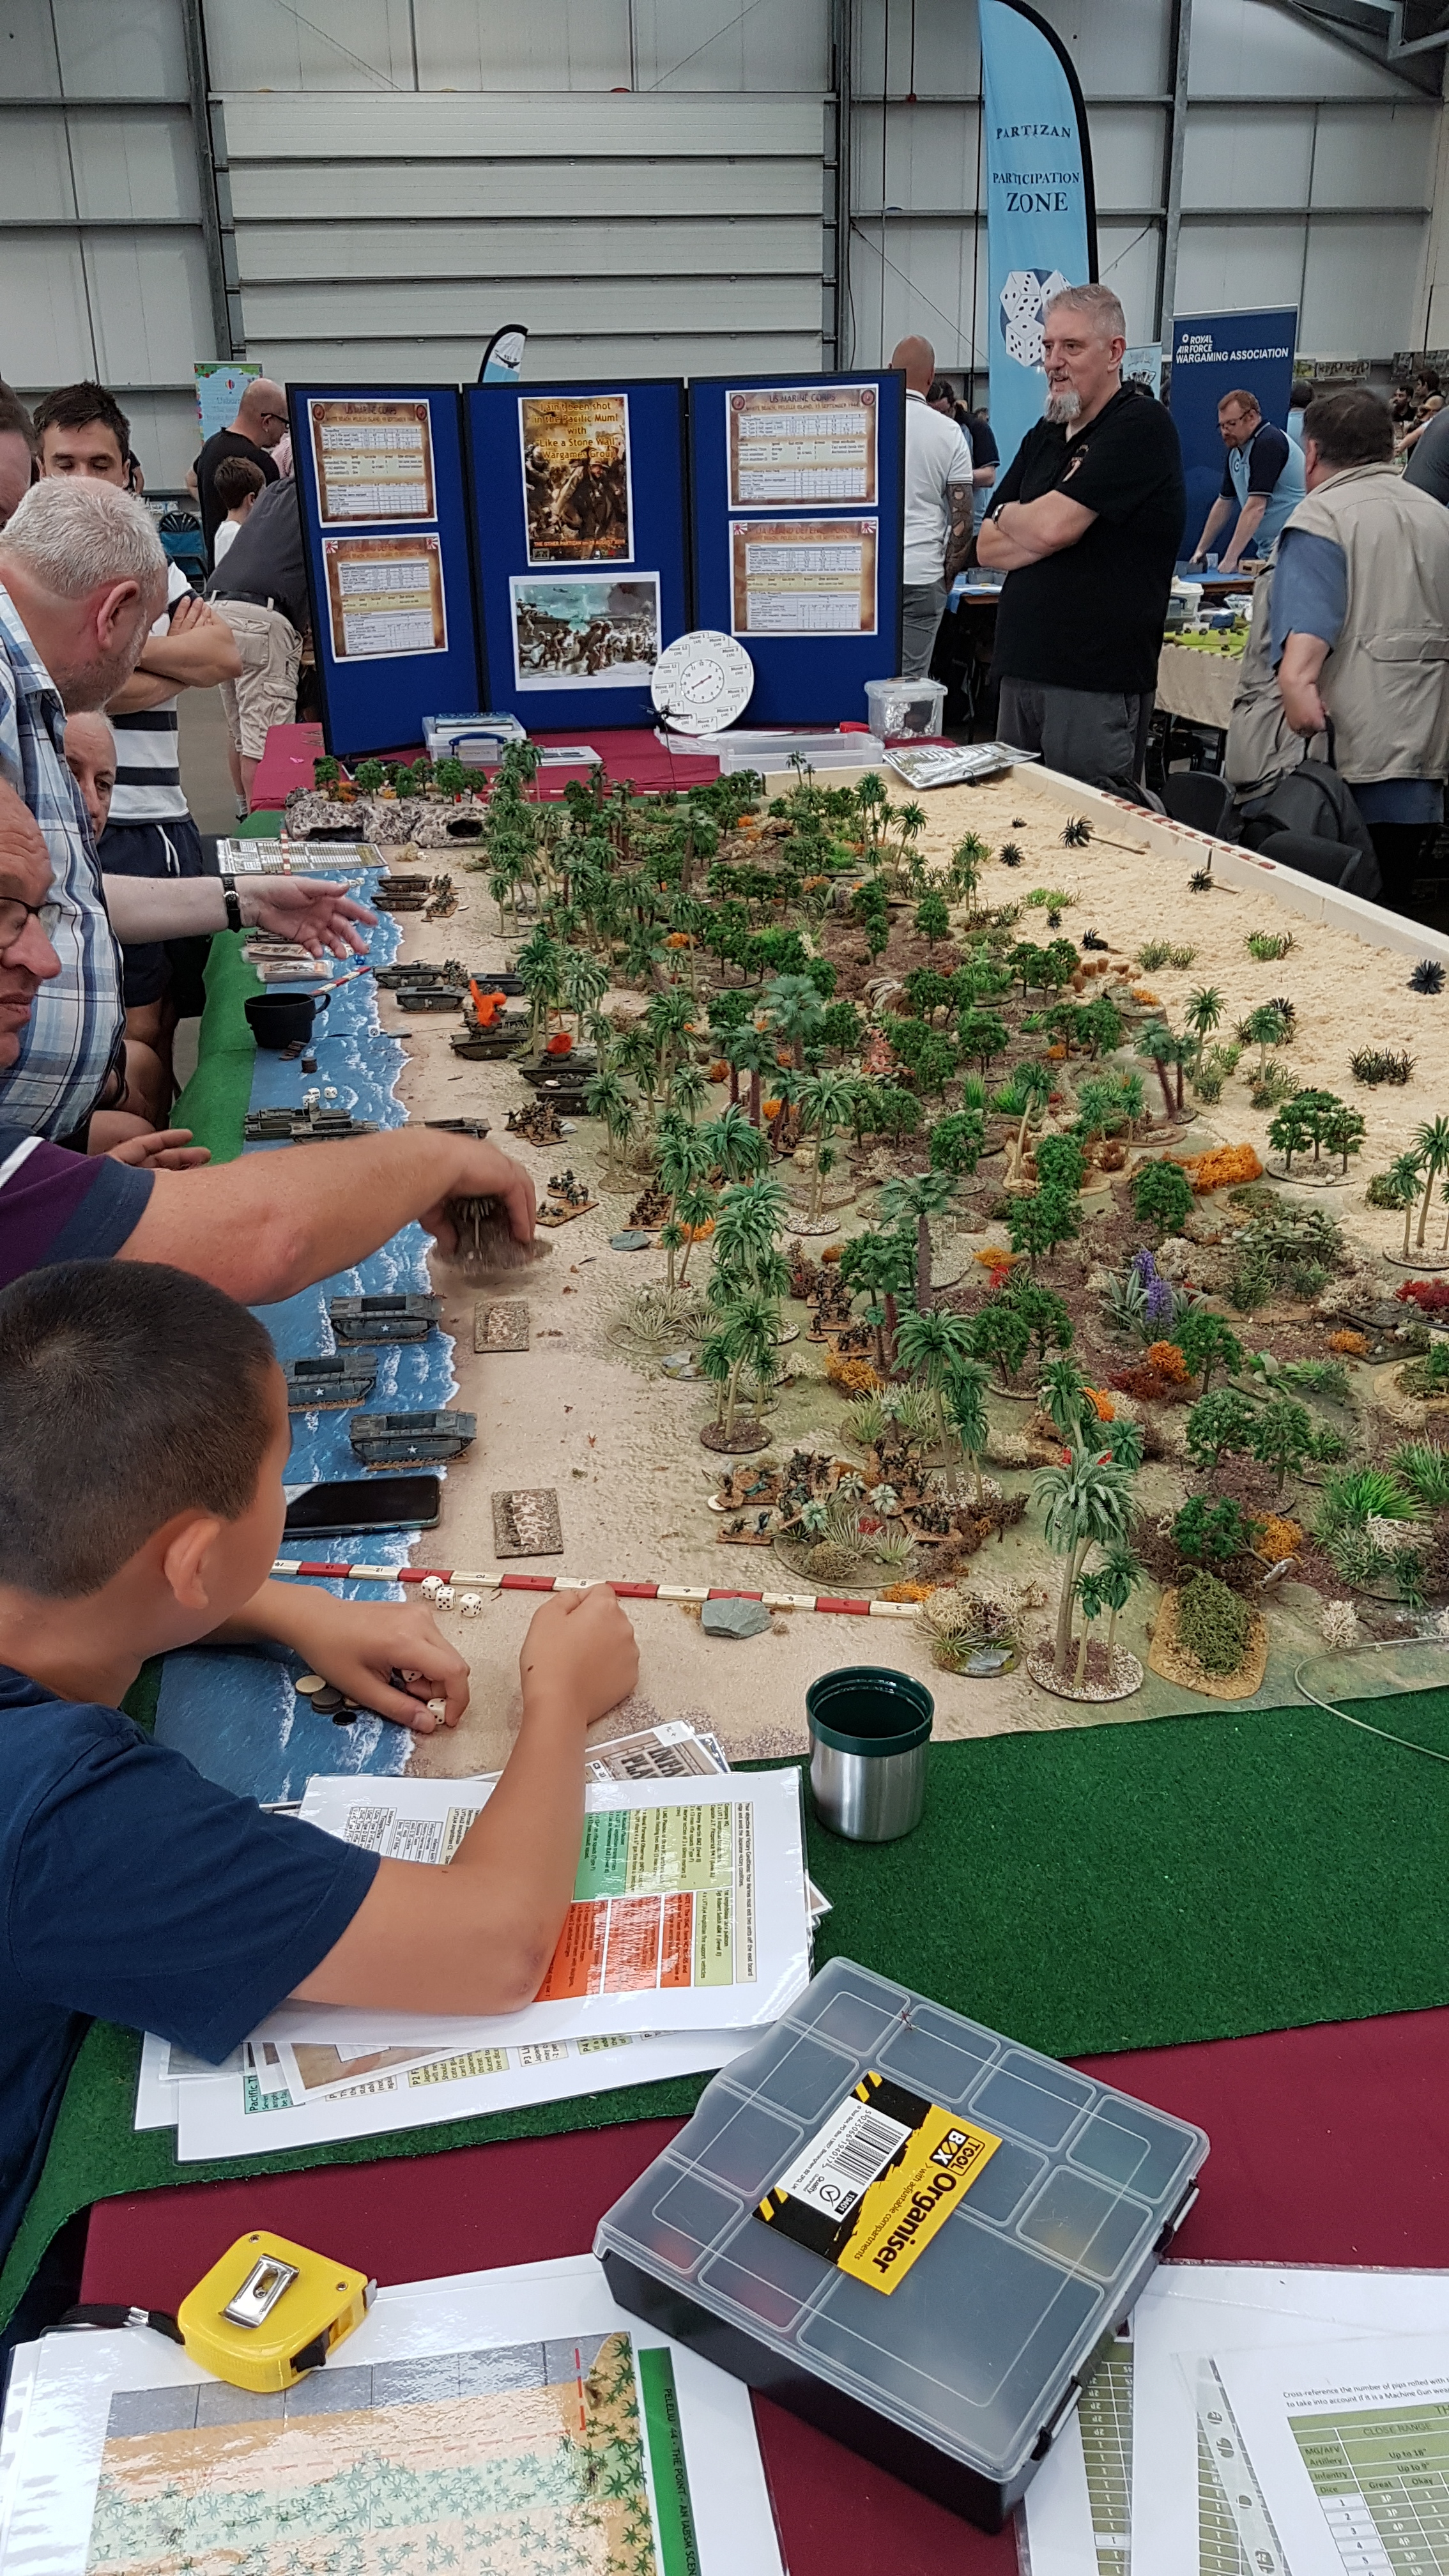 The Peleliu Game (which won best game of the show)